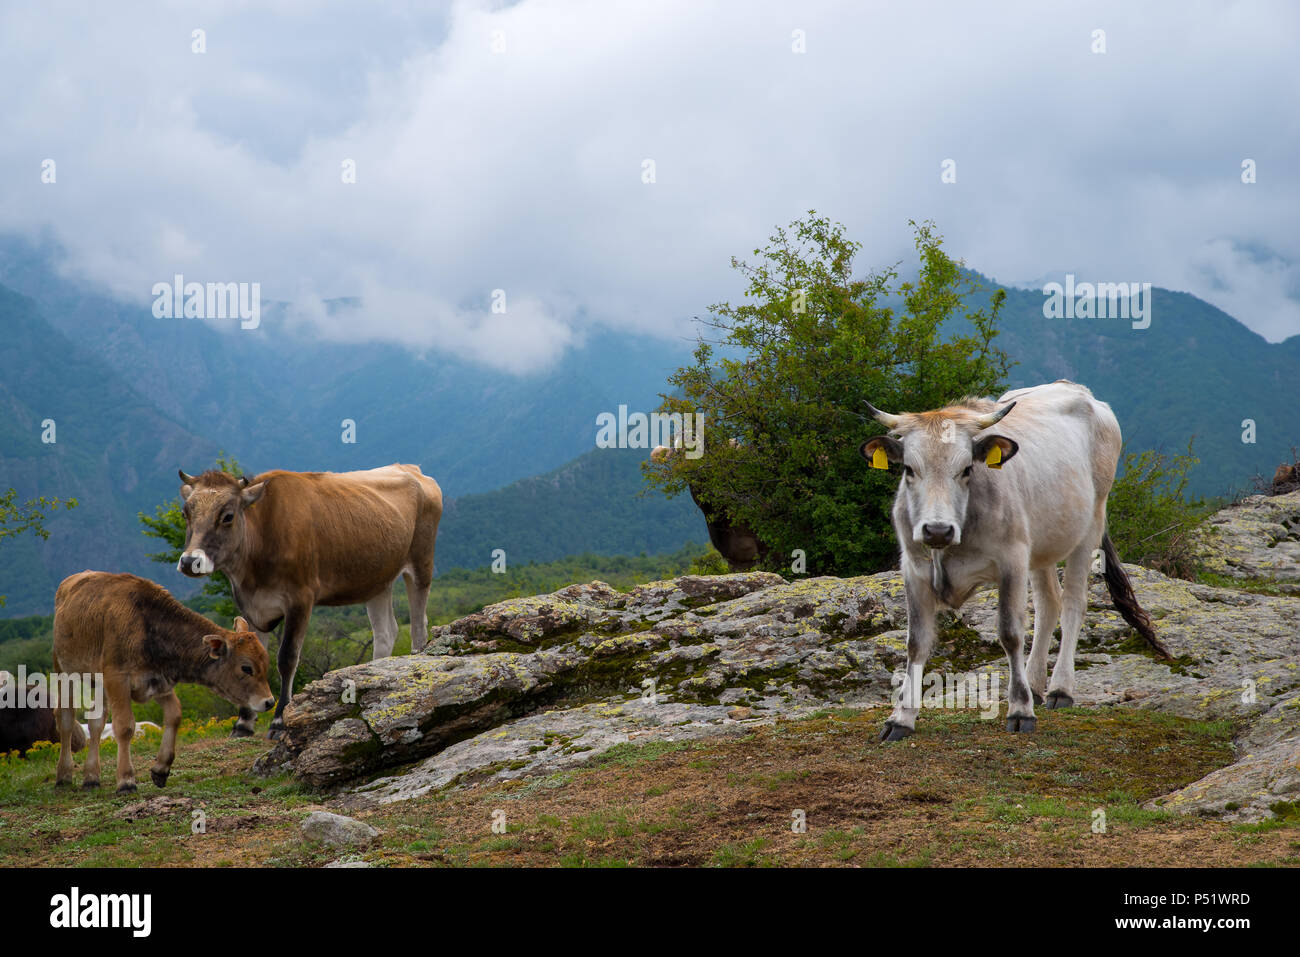 Mountain livestock farming. Cows and calves. Cattle are raised as livestock for meat, for milk, and for hides. Stock Photo